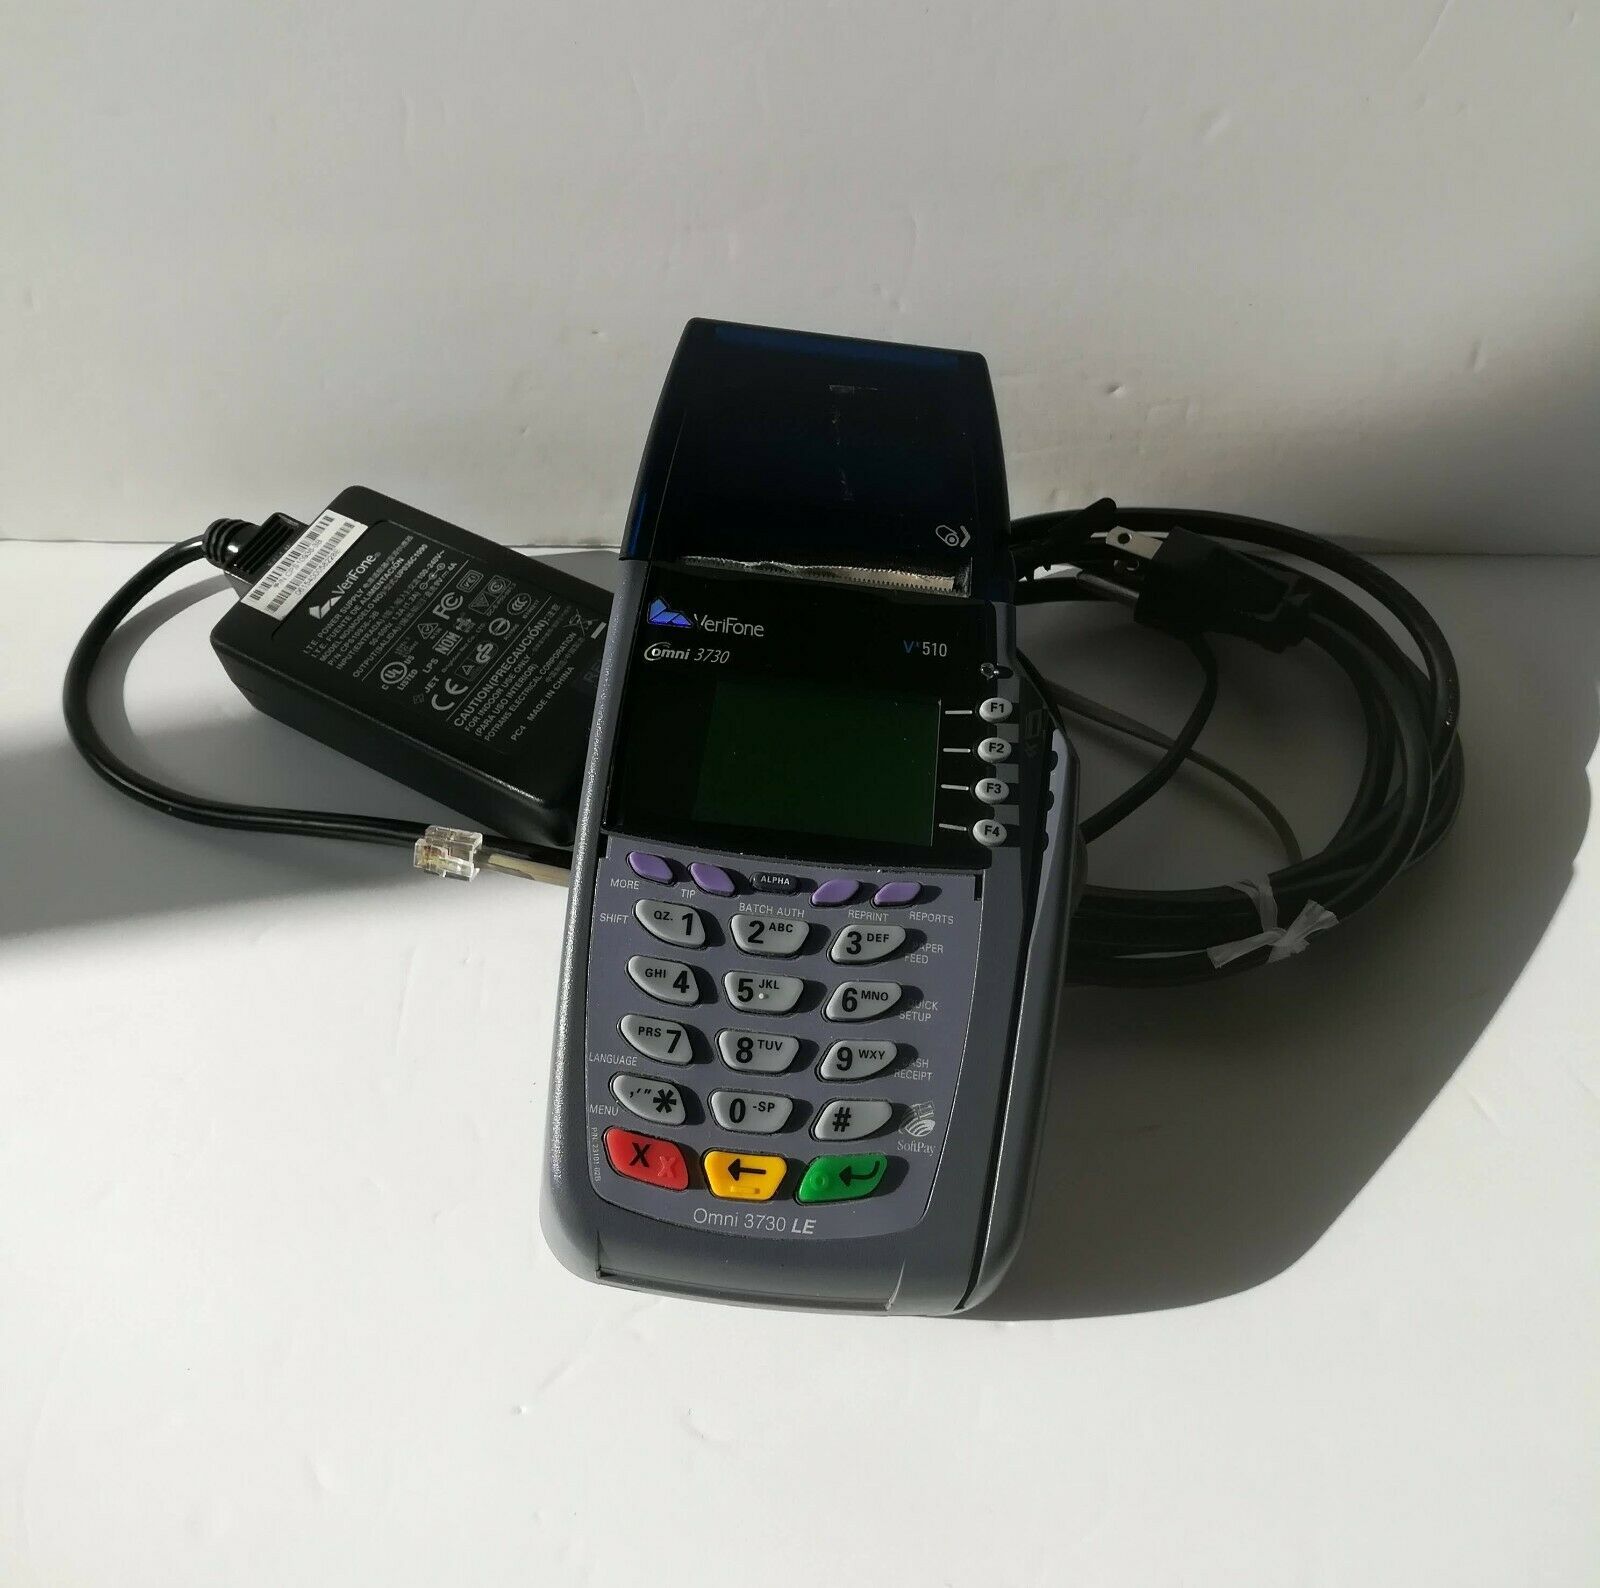 Verifone VX510 Omni 5100 Credit Card Terminal With Printer for sale online 